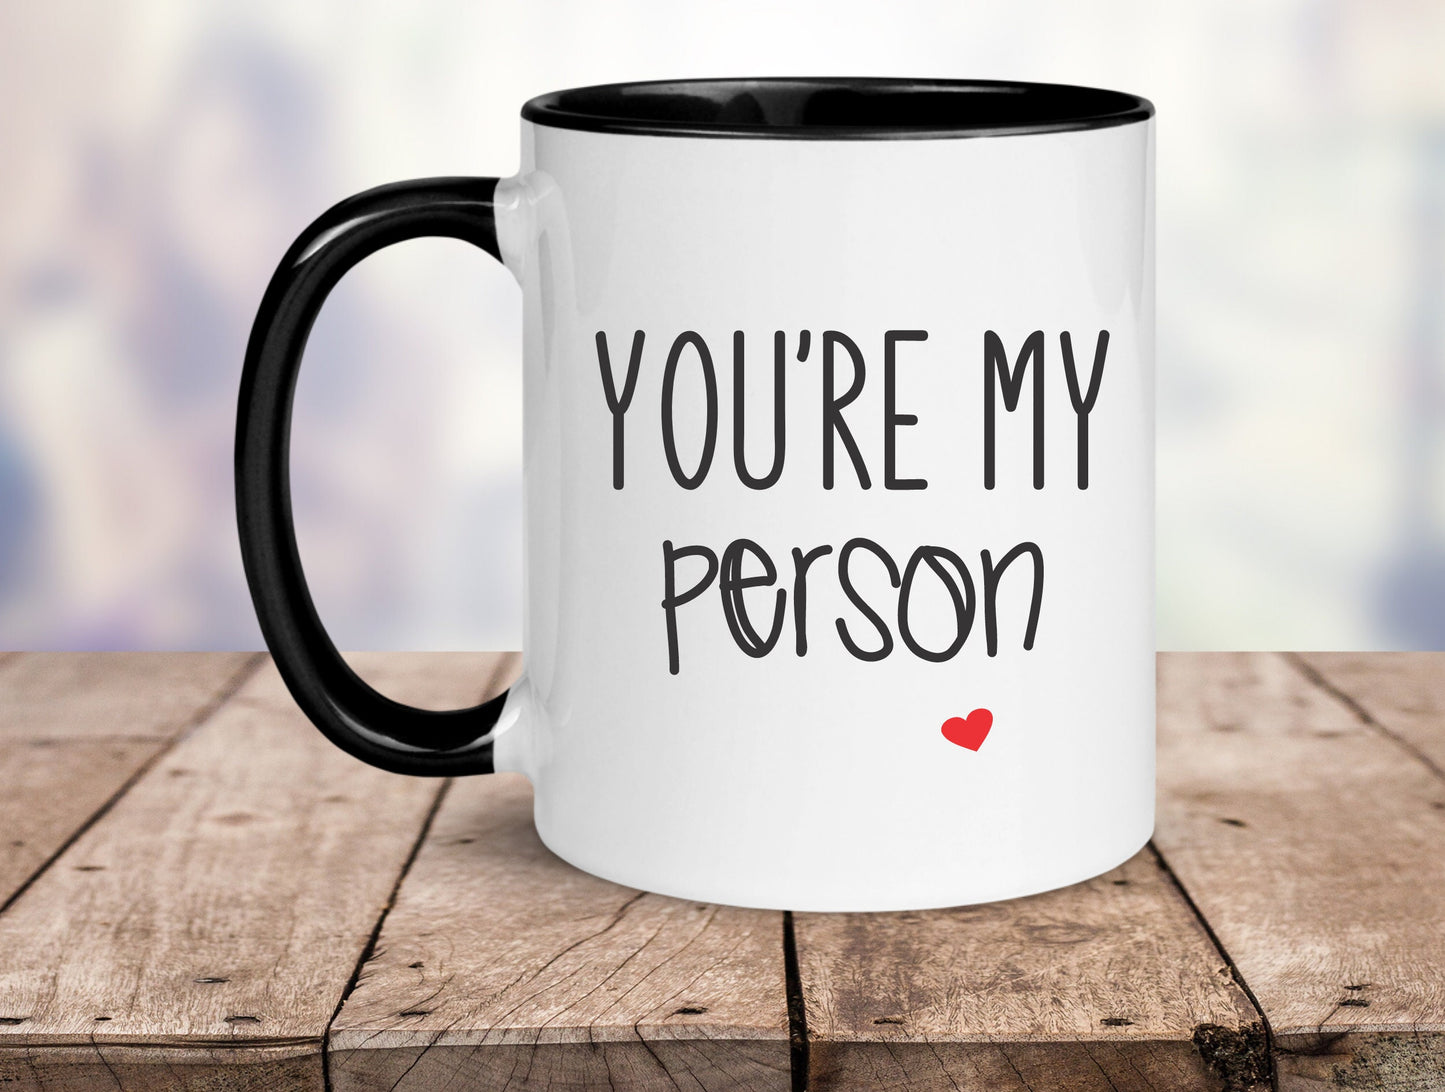 Best Friend Gift, Best Friend Mug, Mug Gift, Personalized gift for her, You're my person, Youre my person, Friendship, Sister Gift